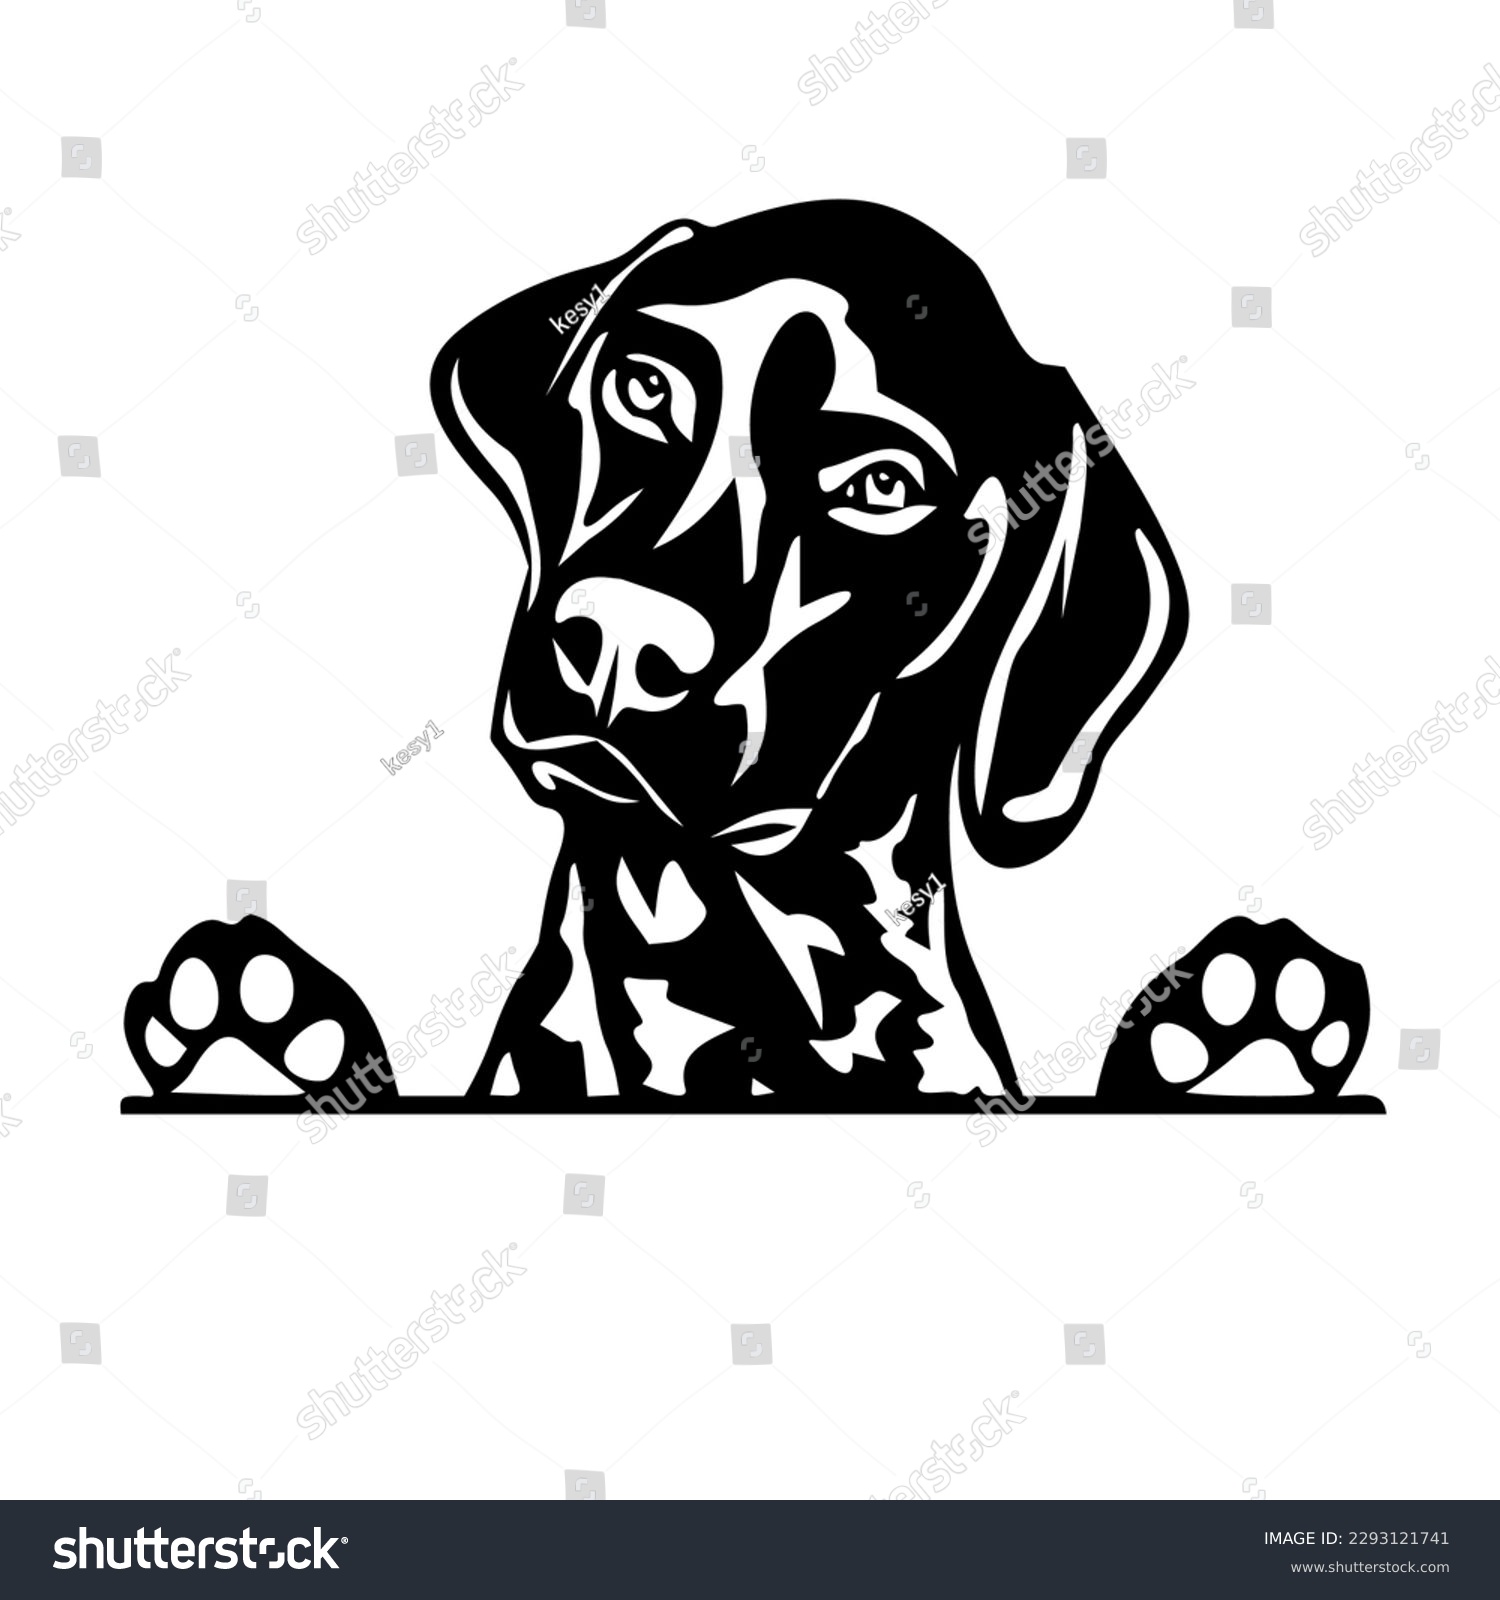 SVG of dog vector icon. dog lovers icon svg